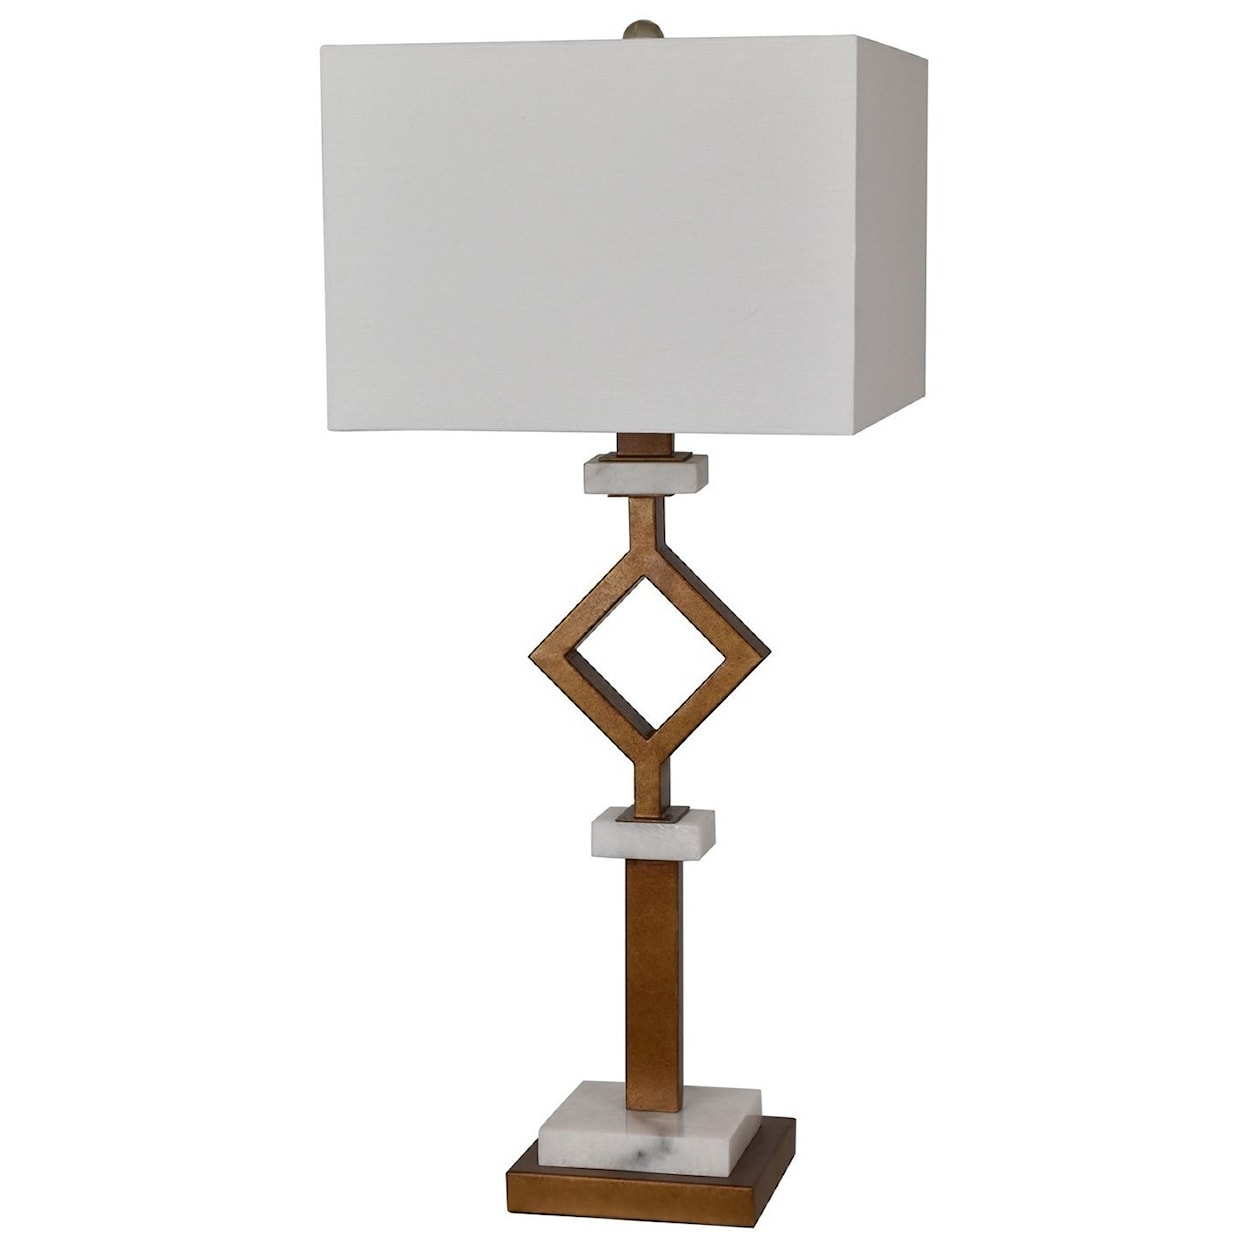 Crestview Collection Lighting Marseilles Table Lamp